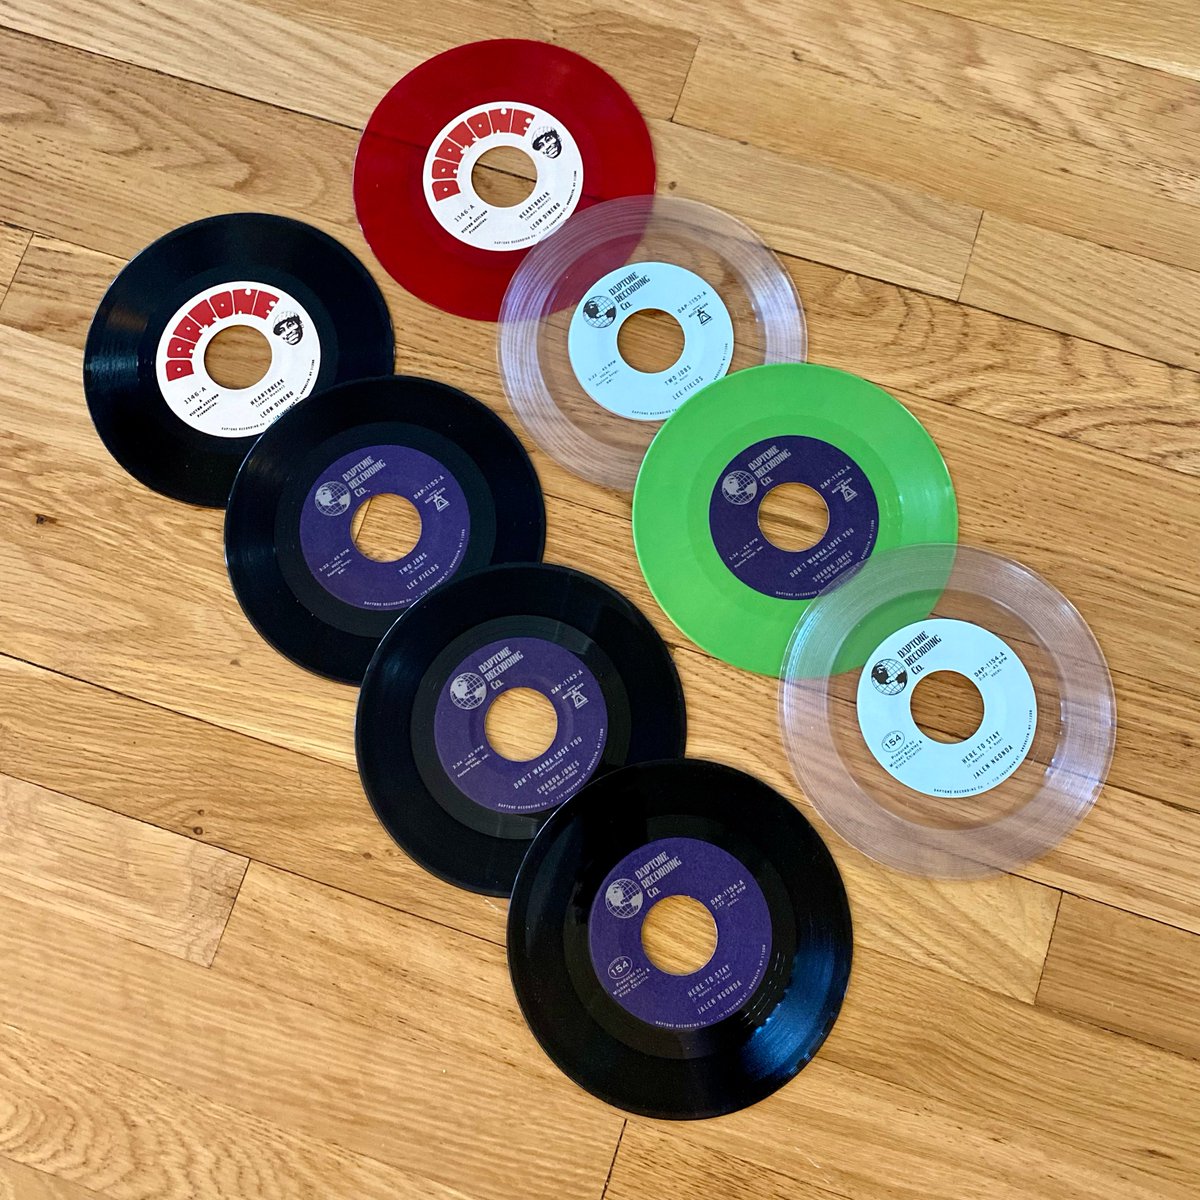 Another flurry of 45s dropping Friday, this time from Sharon Jones & the Dap-Kings, Jalen Ngonda, Lee Fields, and Leon Dinero 💫 Listen & pre-order standard and color 45s ~ 45s available to purchase individually or as a bundle linktr.ee/daptonerecords